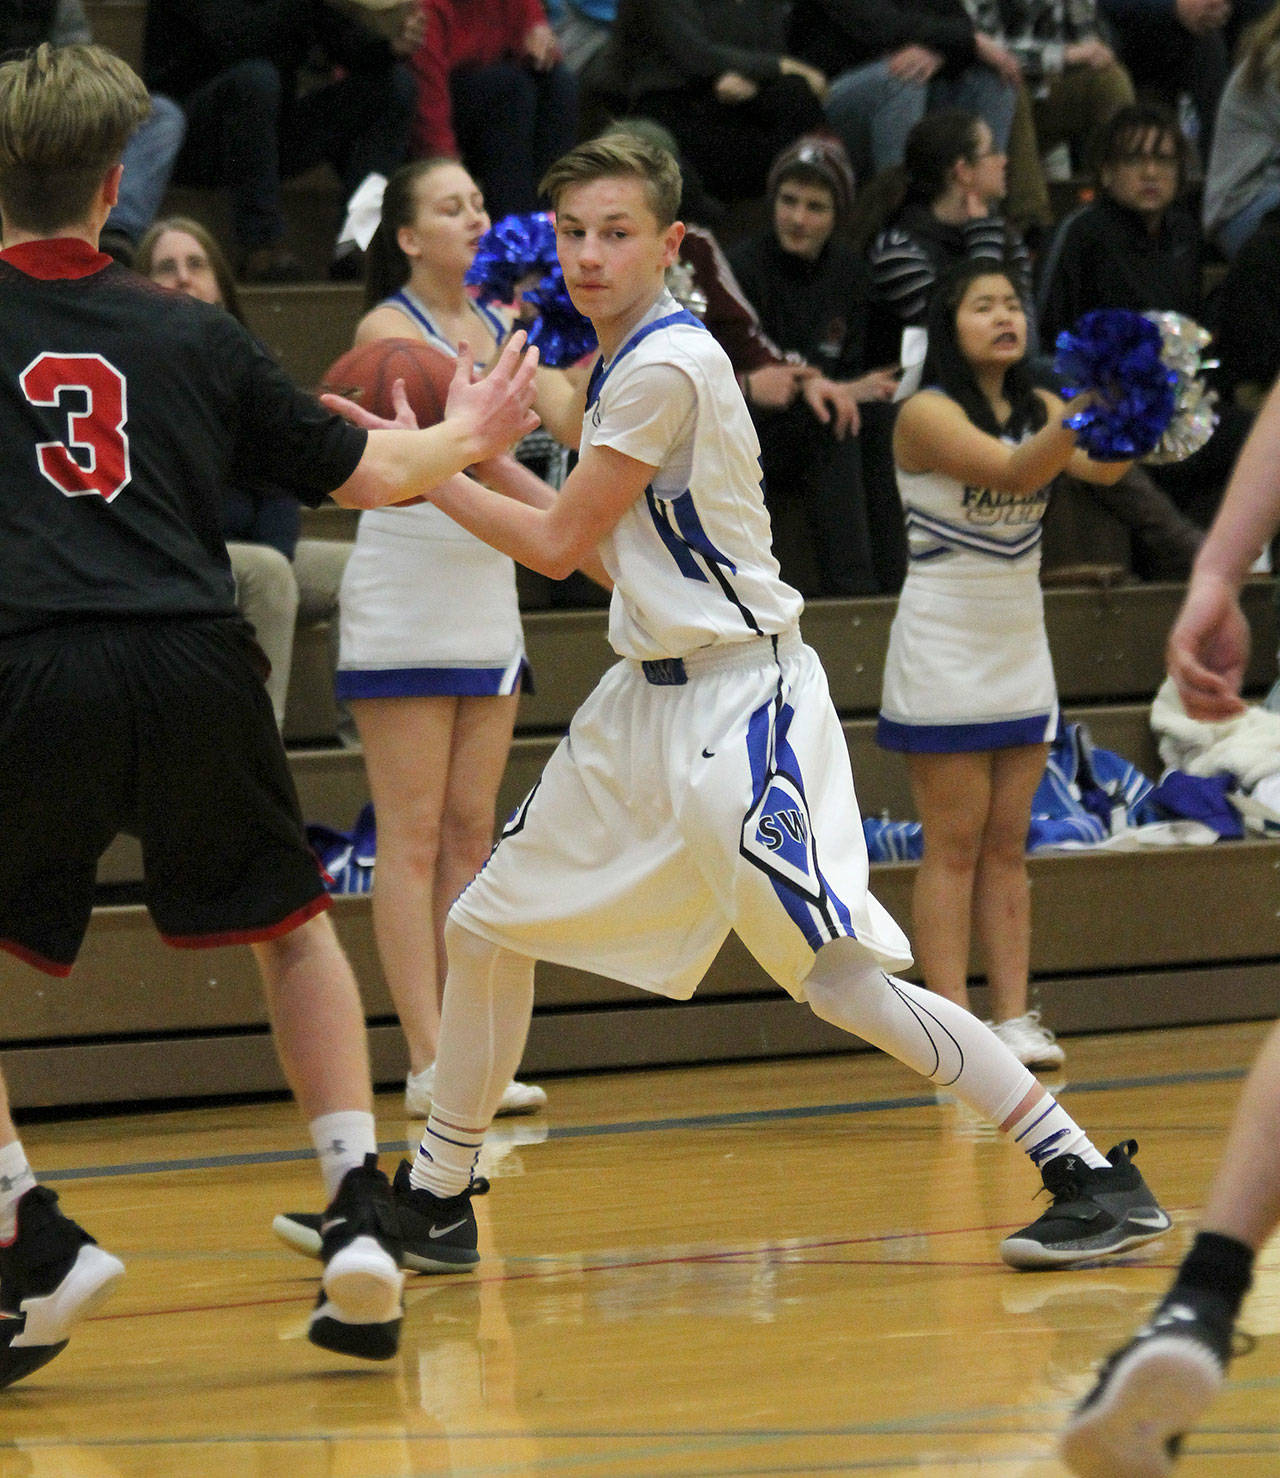 Senior Brock Gray looks for an open teammate.(Photo by Jim Waller/ South Whidbey Record)